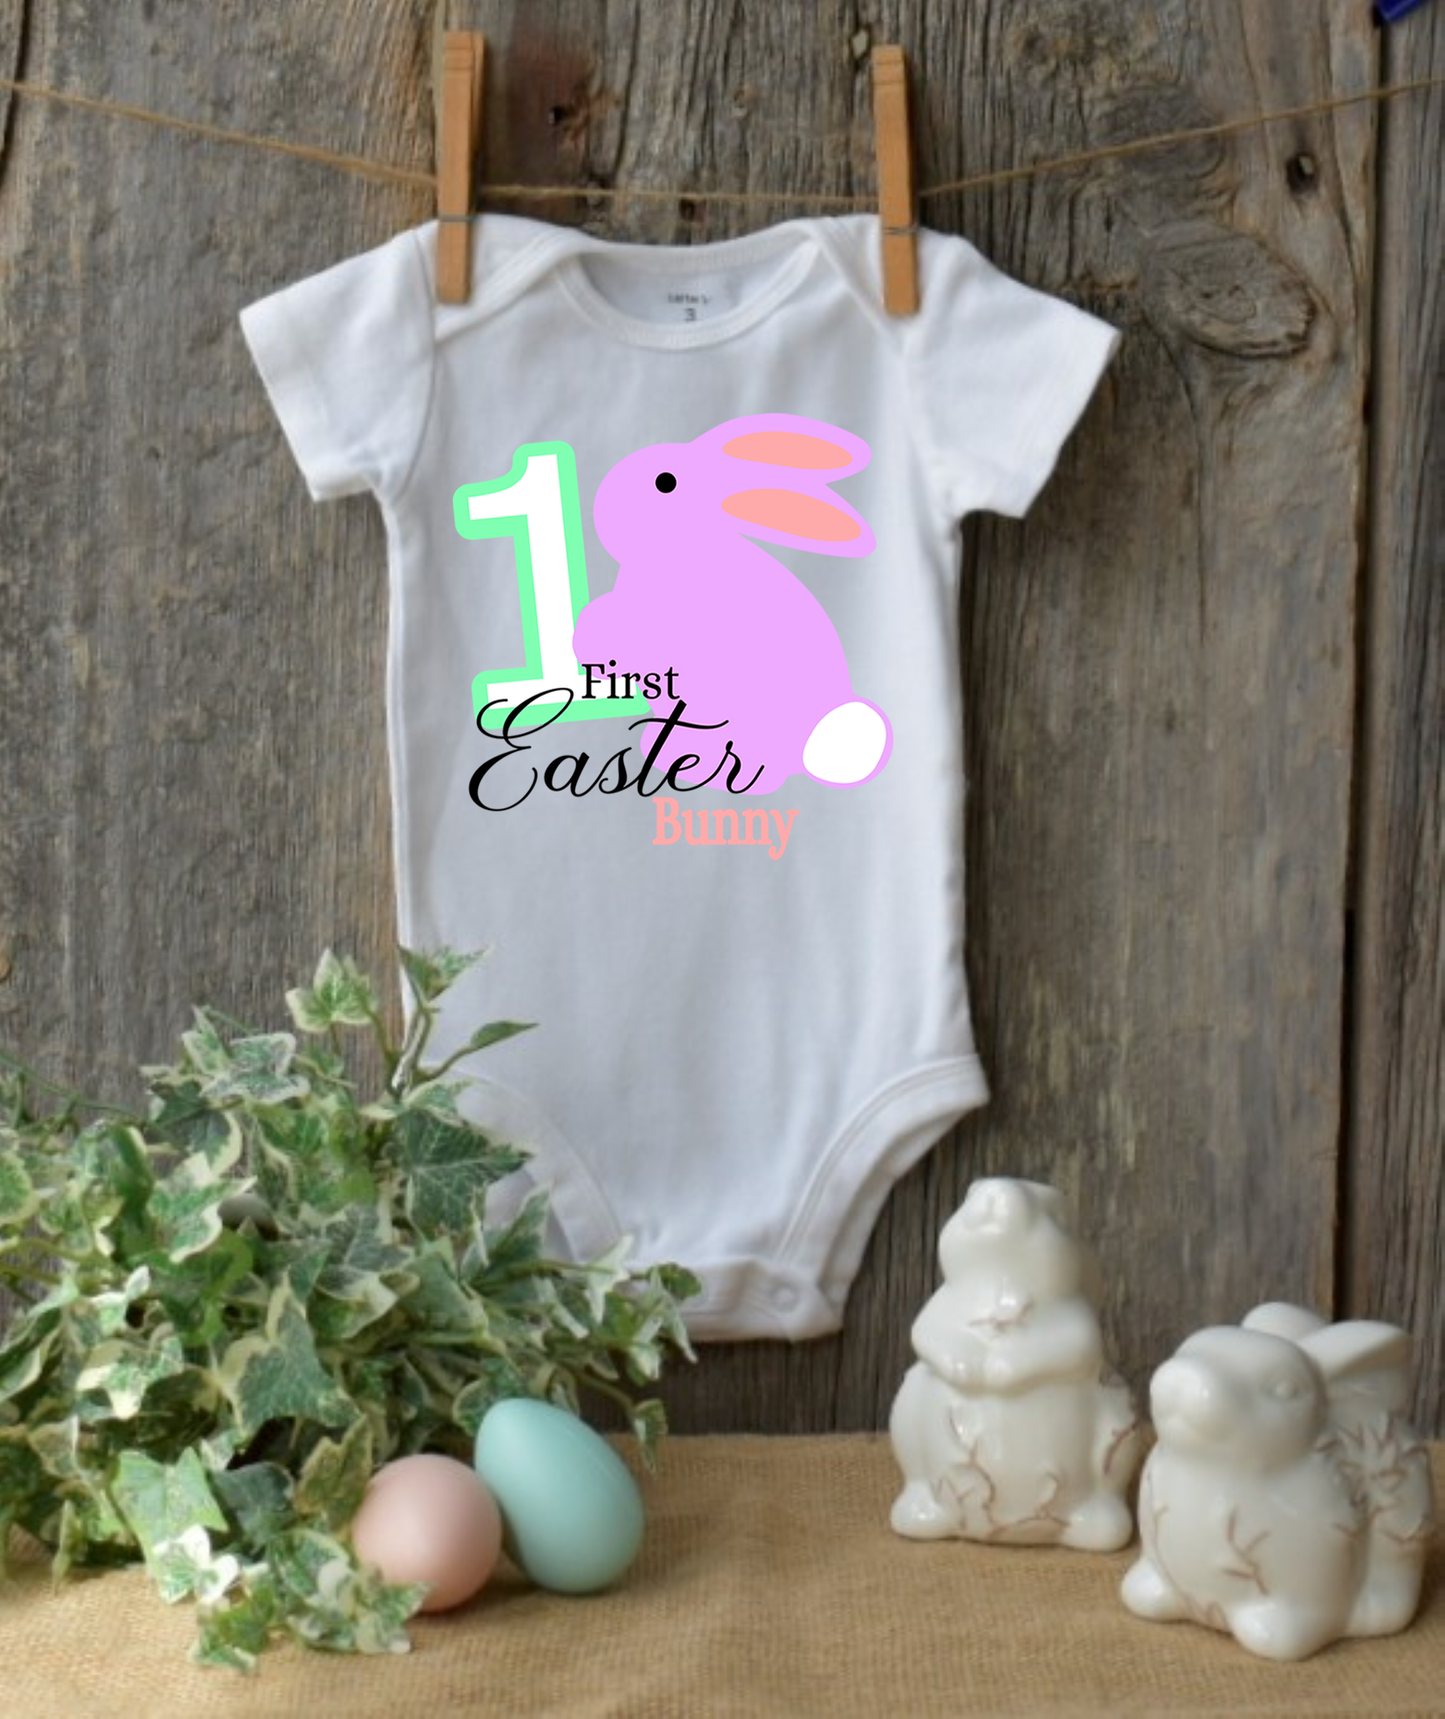 Adorable Easter Onesie for Your Little One - Get in the Holiday Spirit